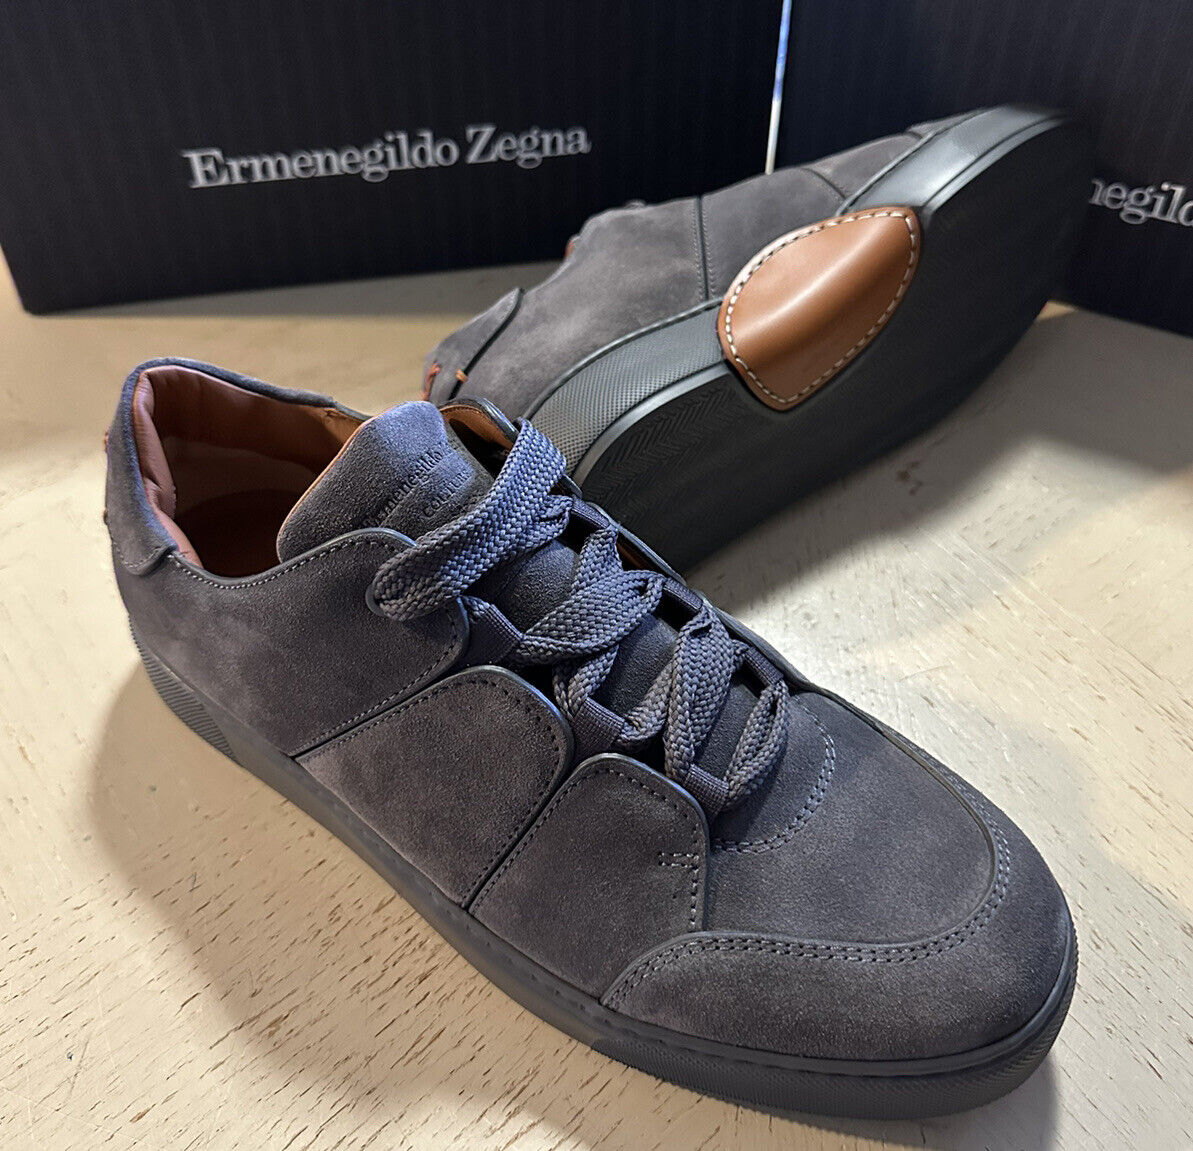 New $850 Ermenegildo Zegna Couture Suede/Leather Sneakers Shoes Dark Gray 9.5 US